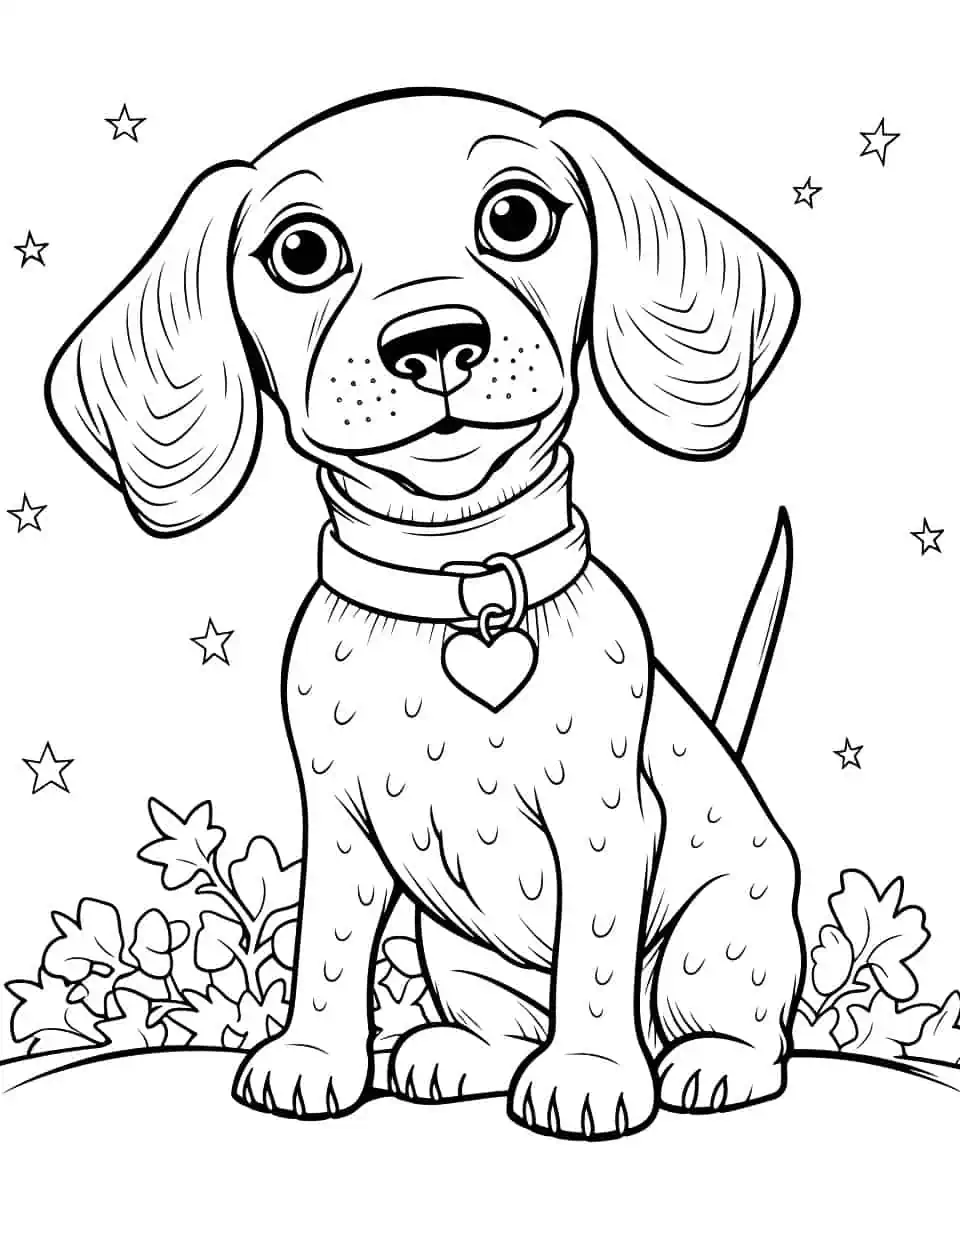 Christmas Dachshund Coloring Page - A Dachshund wearing a Christmas sweater, with a Christmas stars in the background.